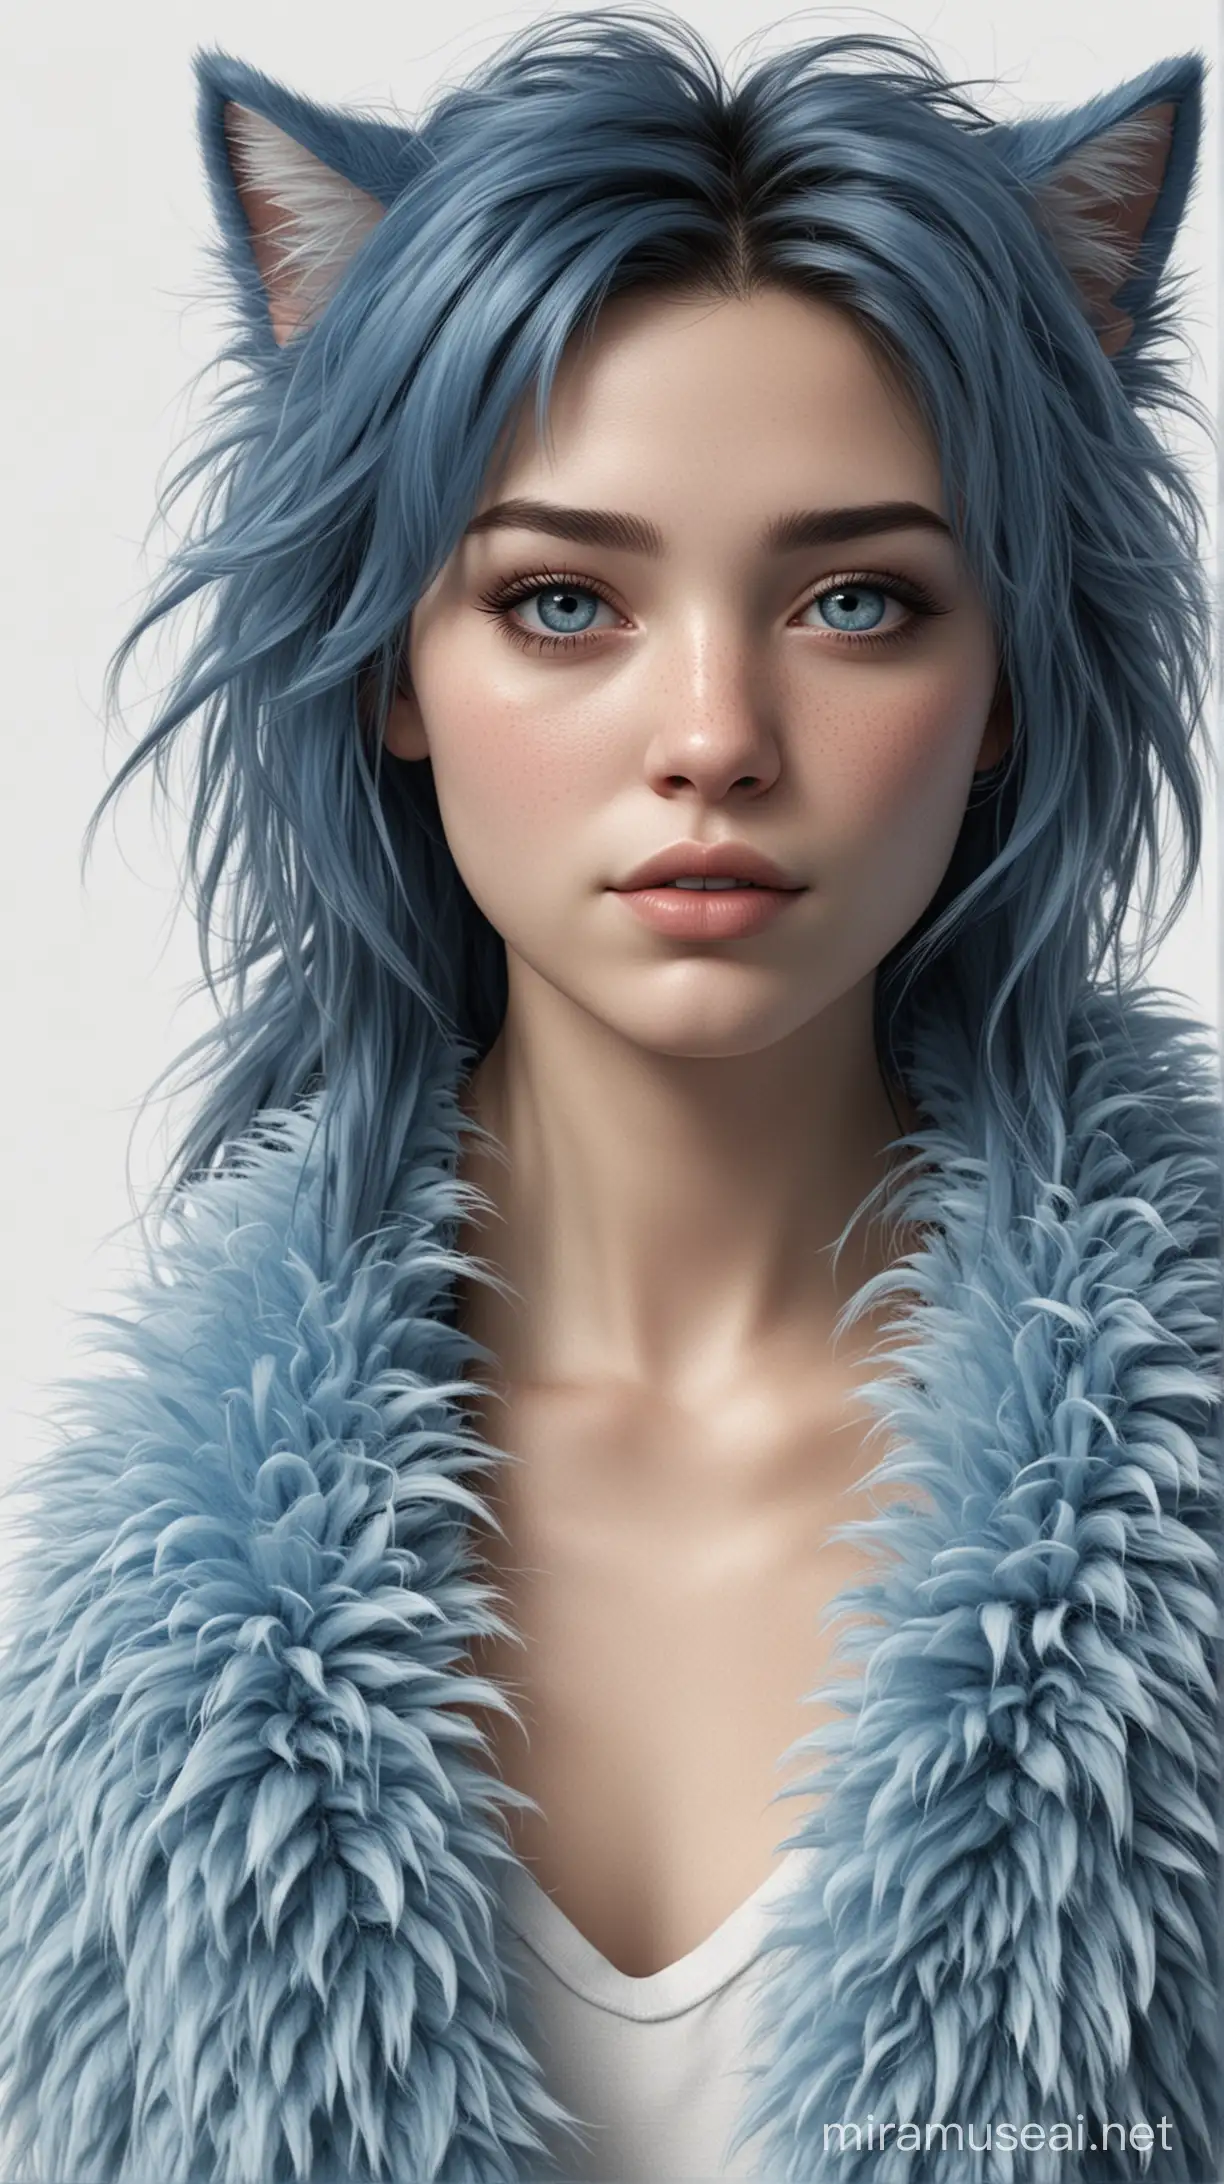 Blue Furry Girl Avatar Playful Character Portrait on White Background